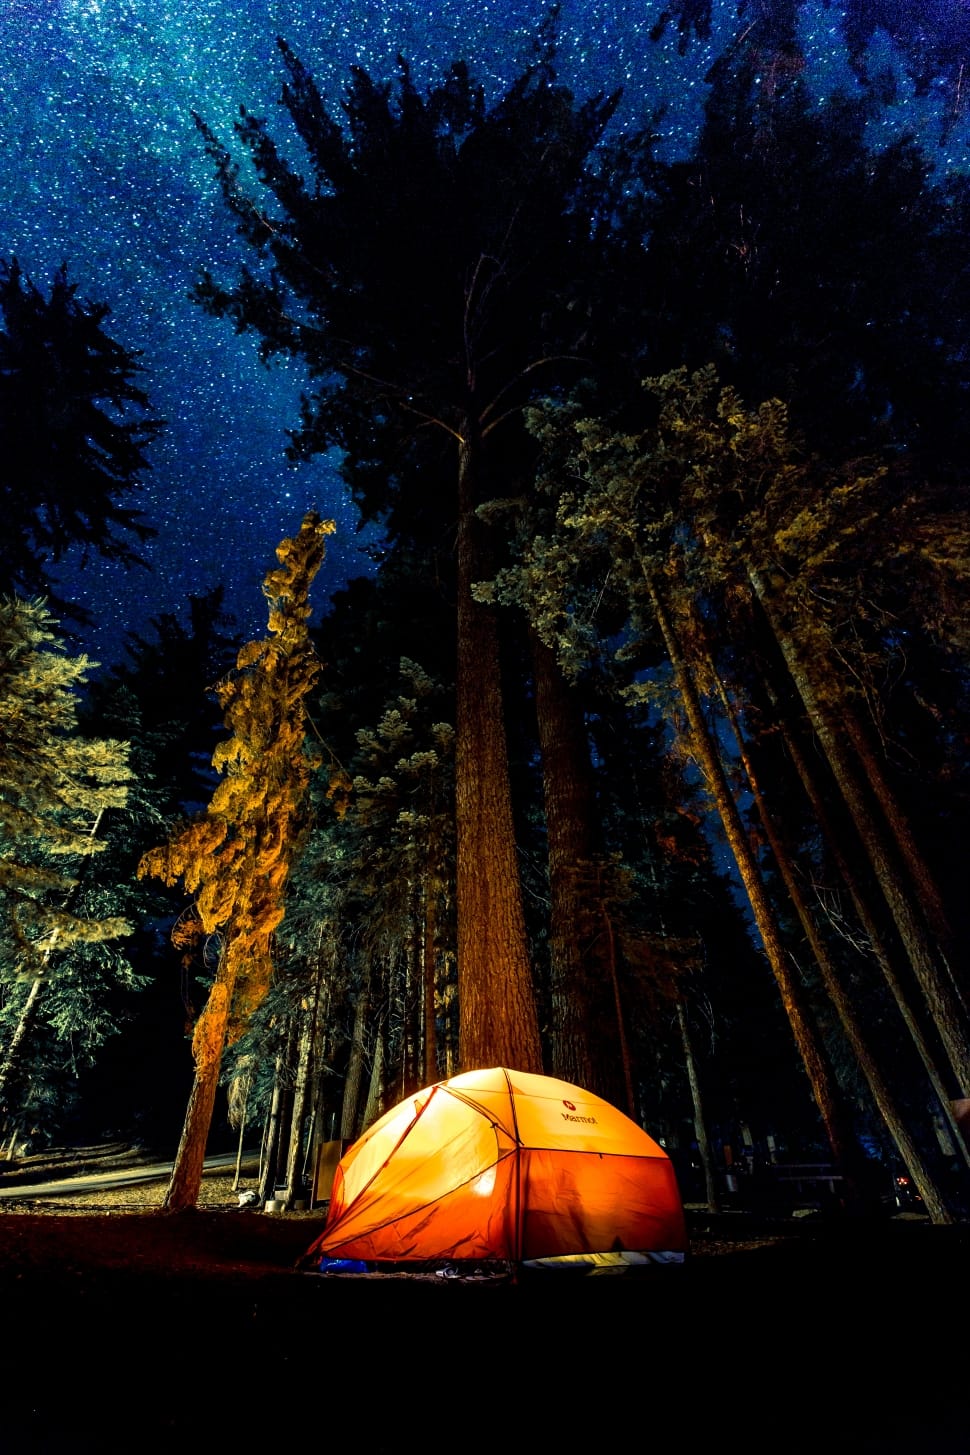 yellow and red campers tent in the middle of forest under starry sky at nighttime preview